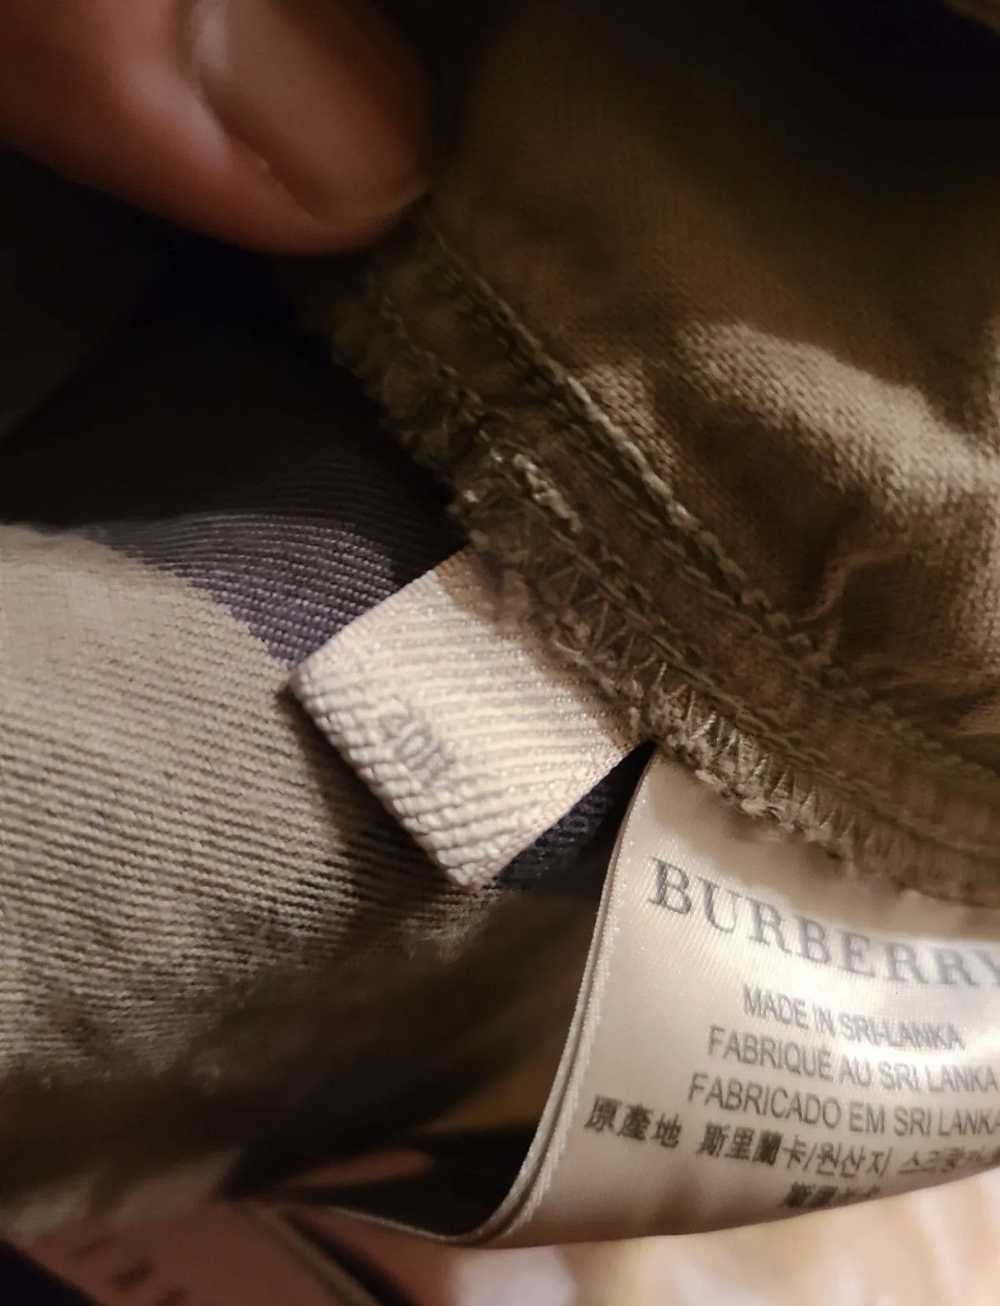 Burberry Mens Burberry Limited Edition Shorts - image 6